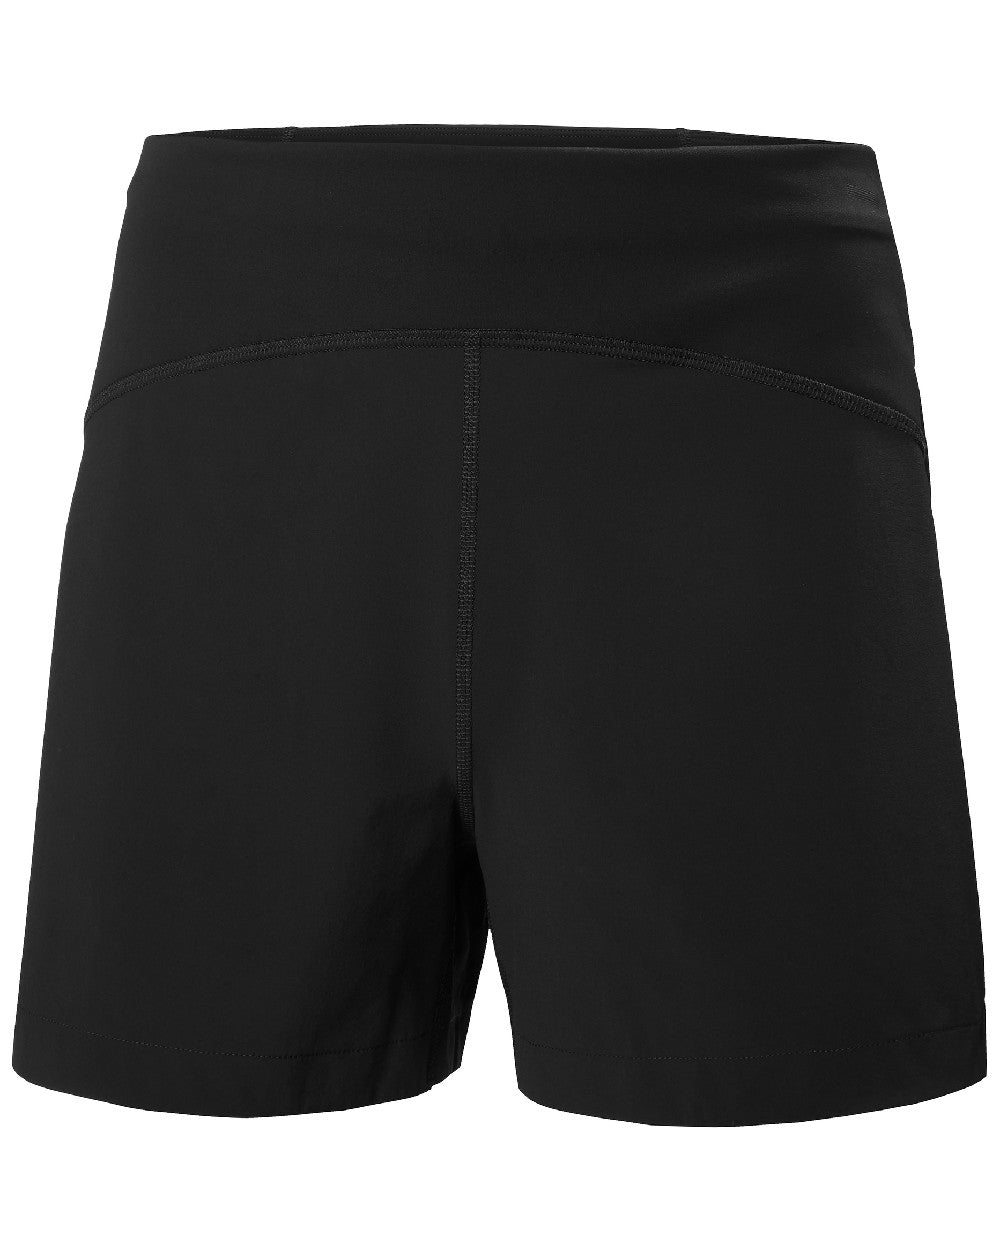 Black coloured Helly Hansen Womens HP Shorts on white background 